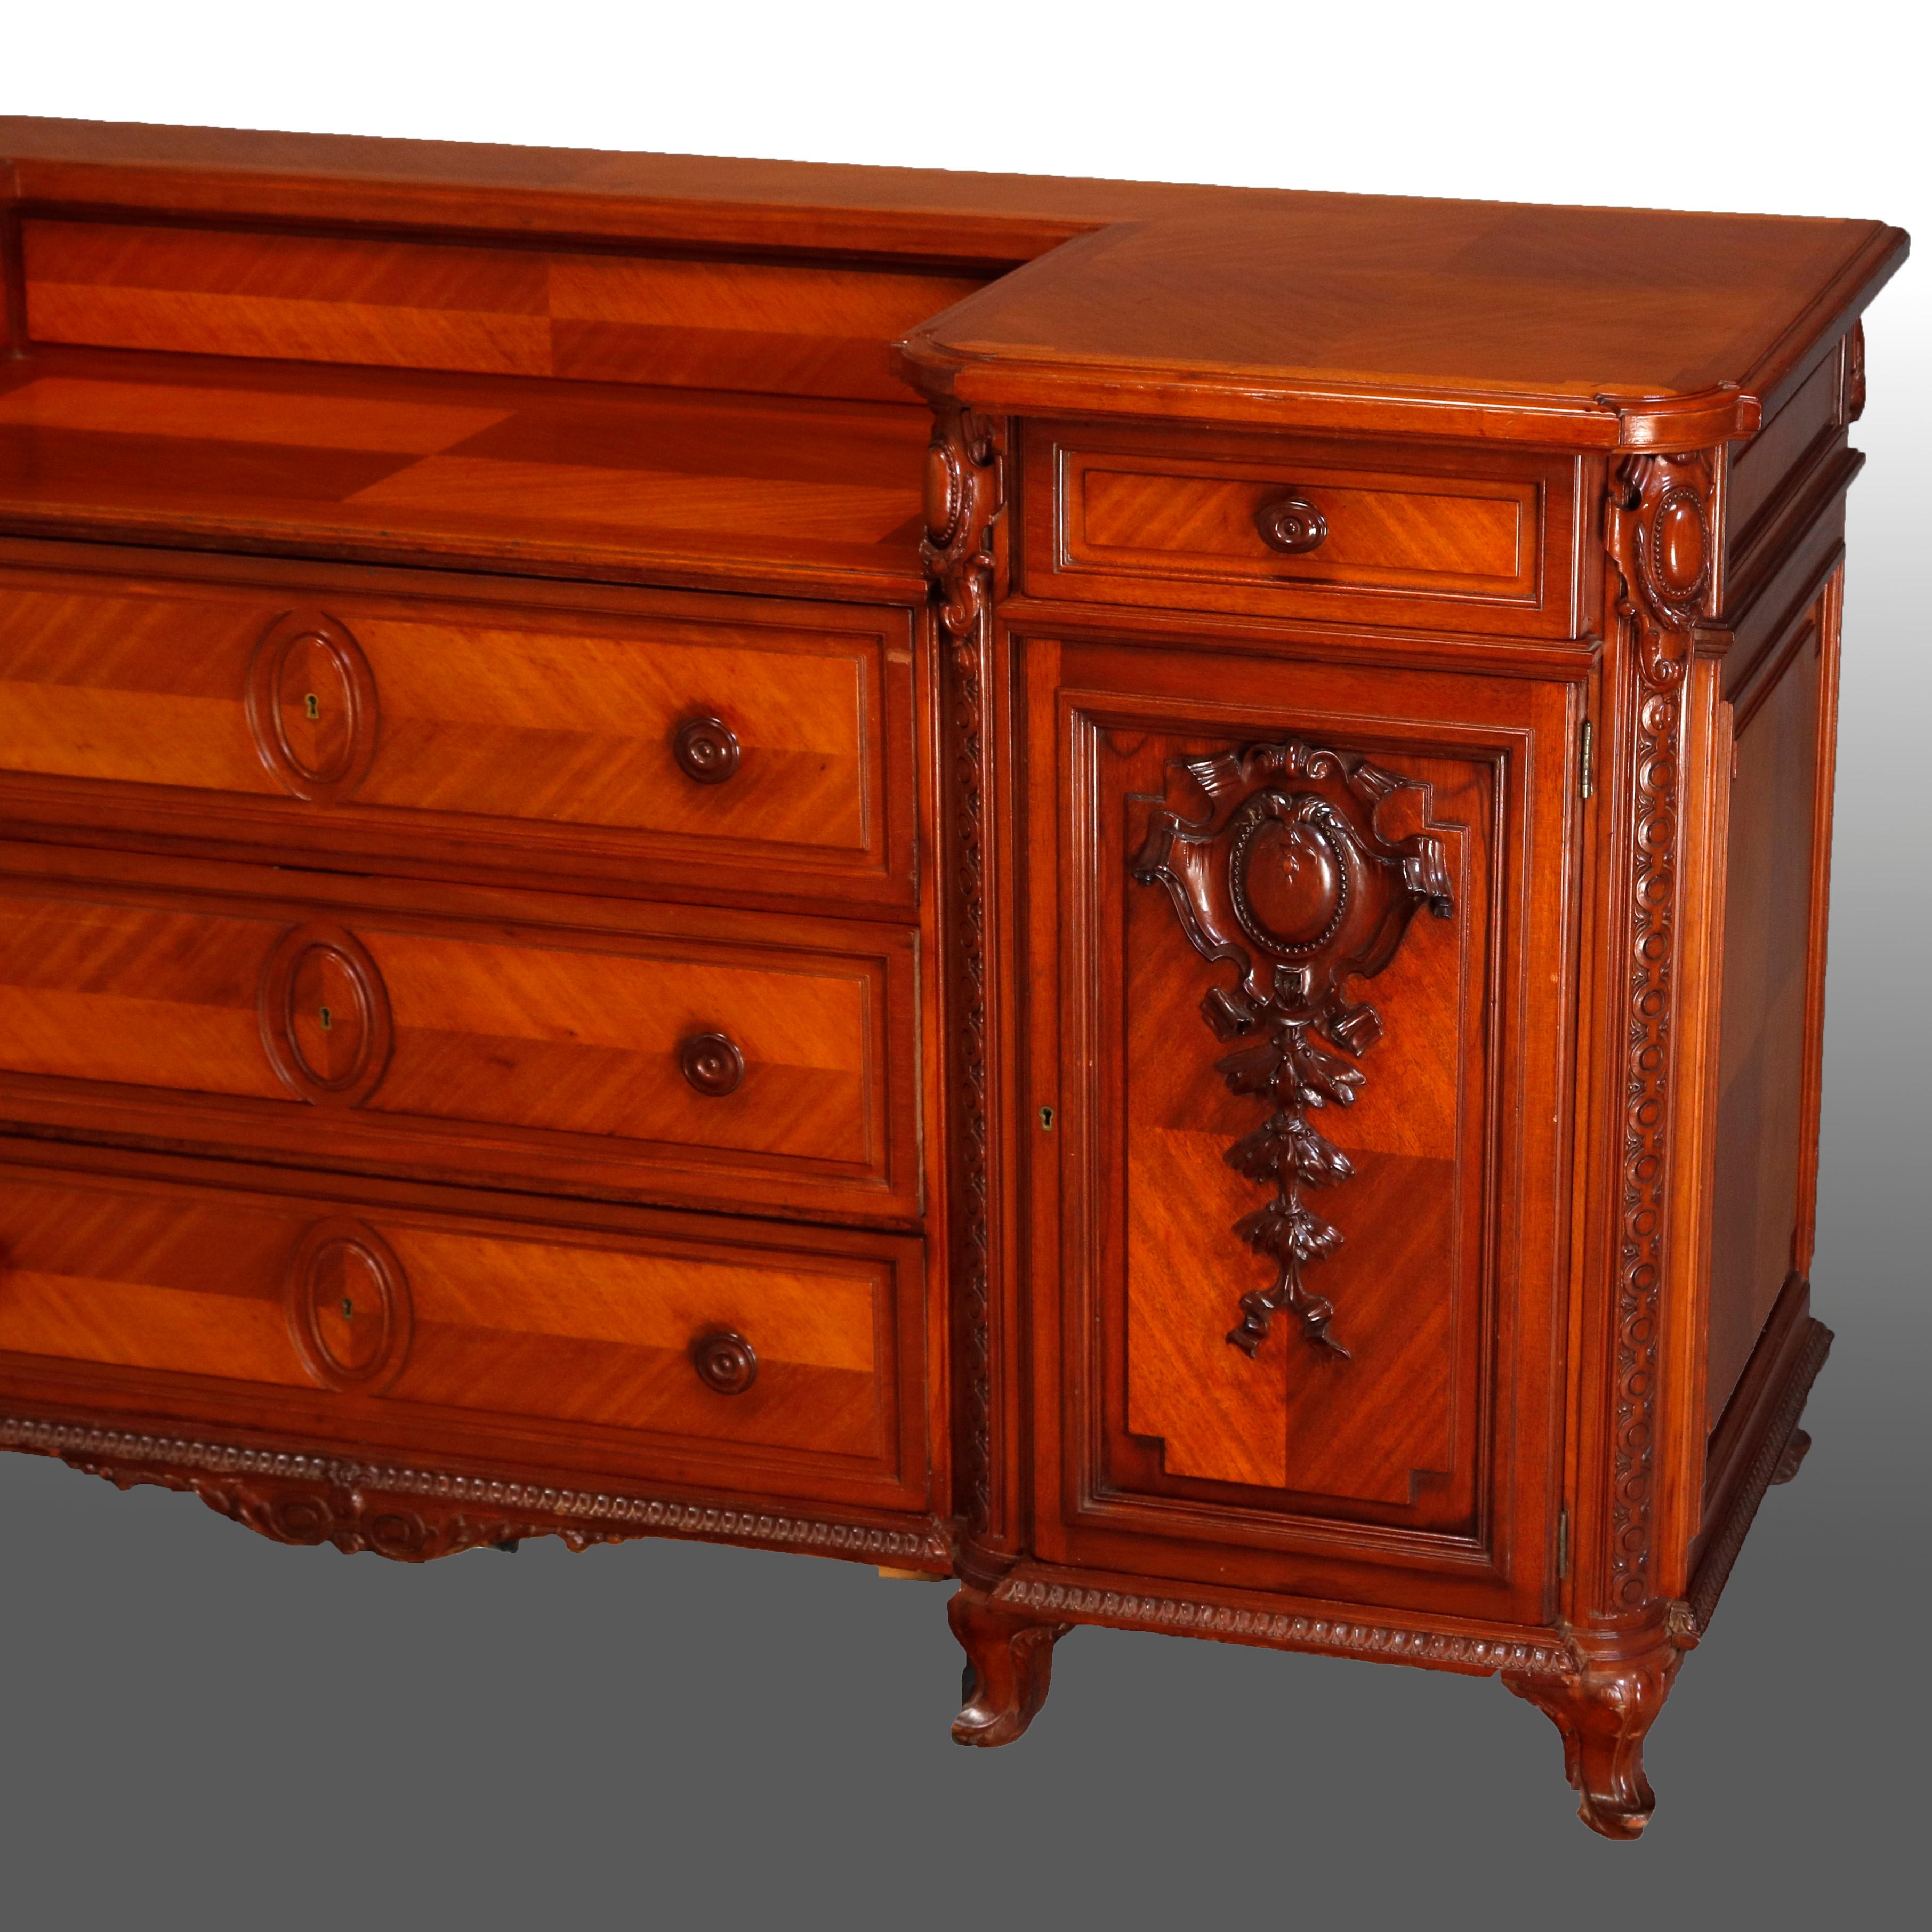 A vintage French sideboard offers mahogany construction with bookmatched satinwood throughout and drop-center top surmounting three central long drawers flanked by cabinets each opening to three pull-out drawers and having carved trim with shield